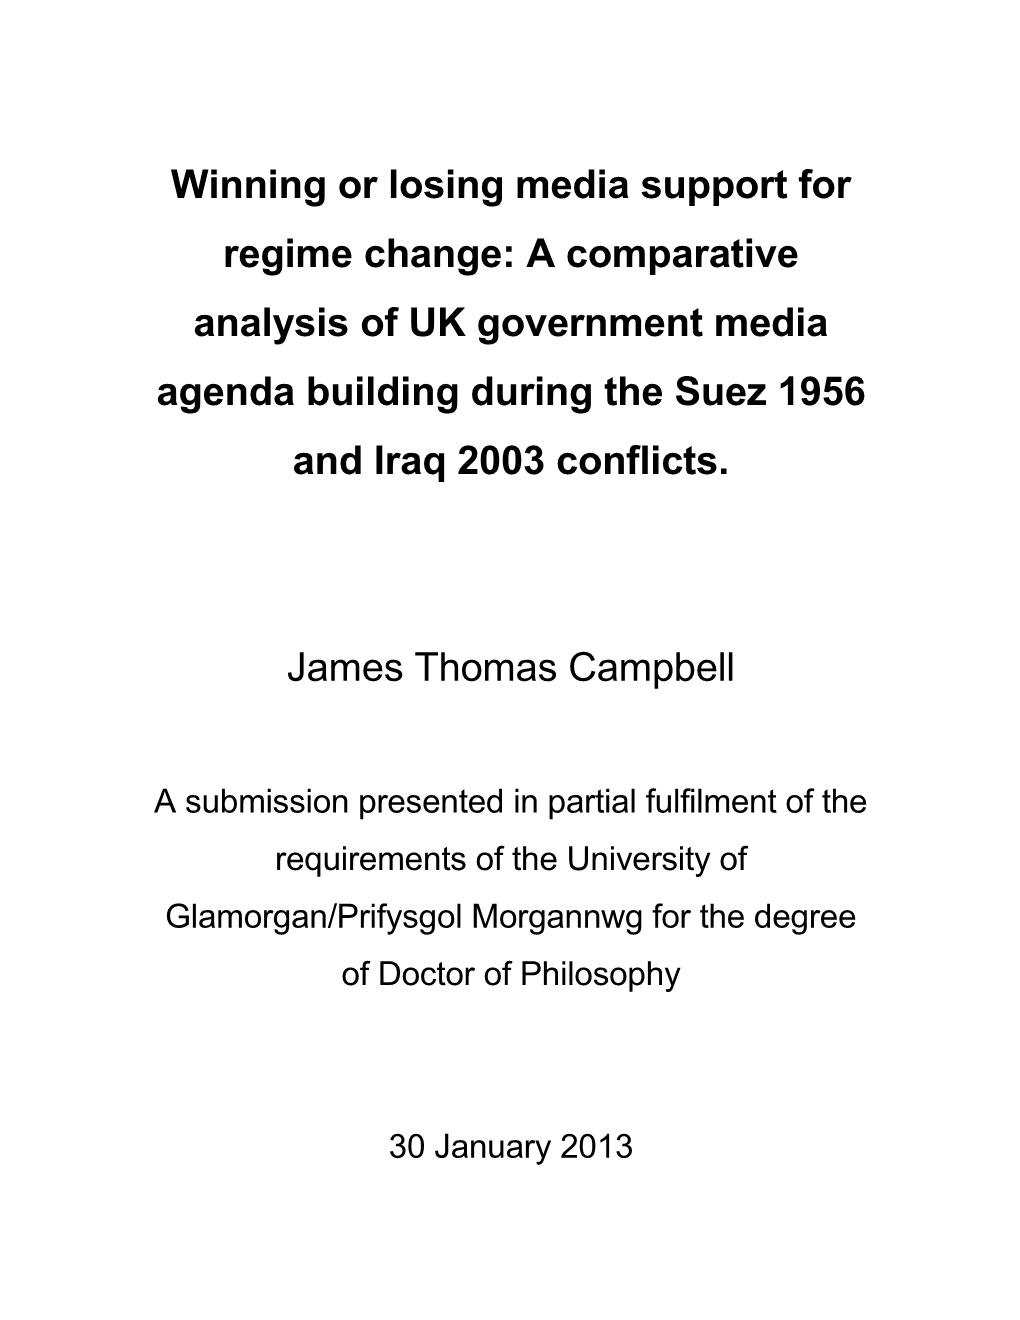 Courting Media Support for War: a Comparative Analysis of UK